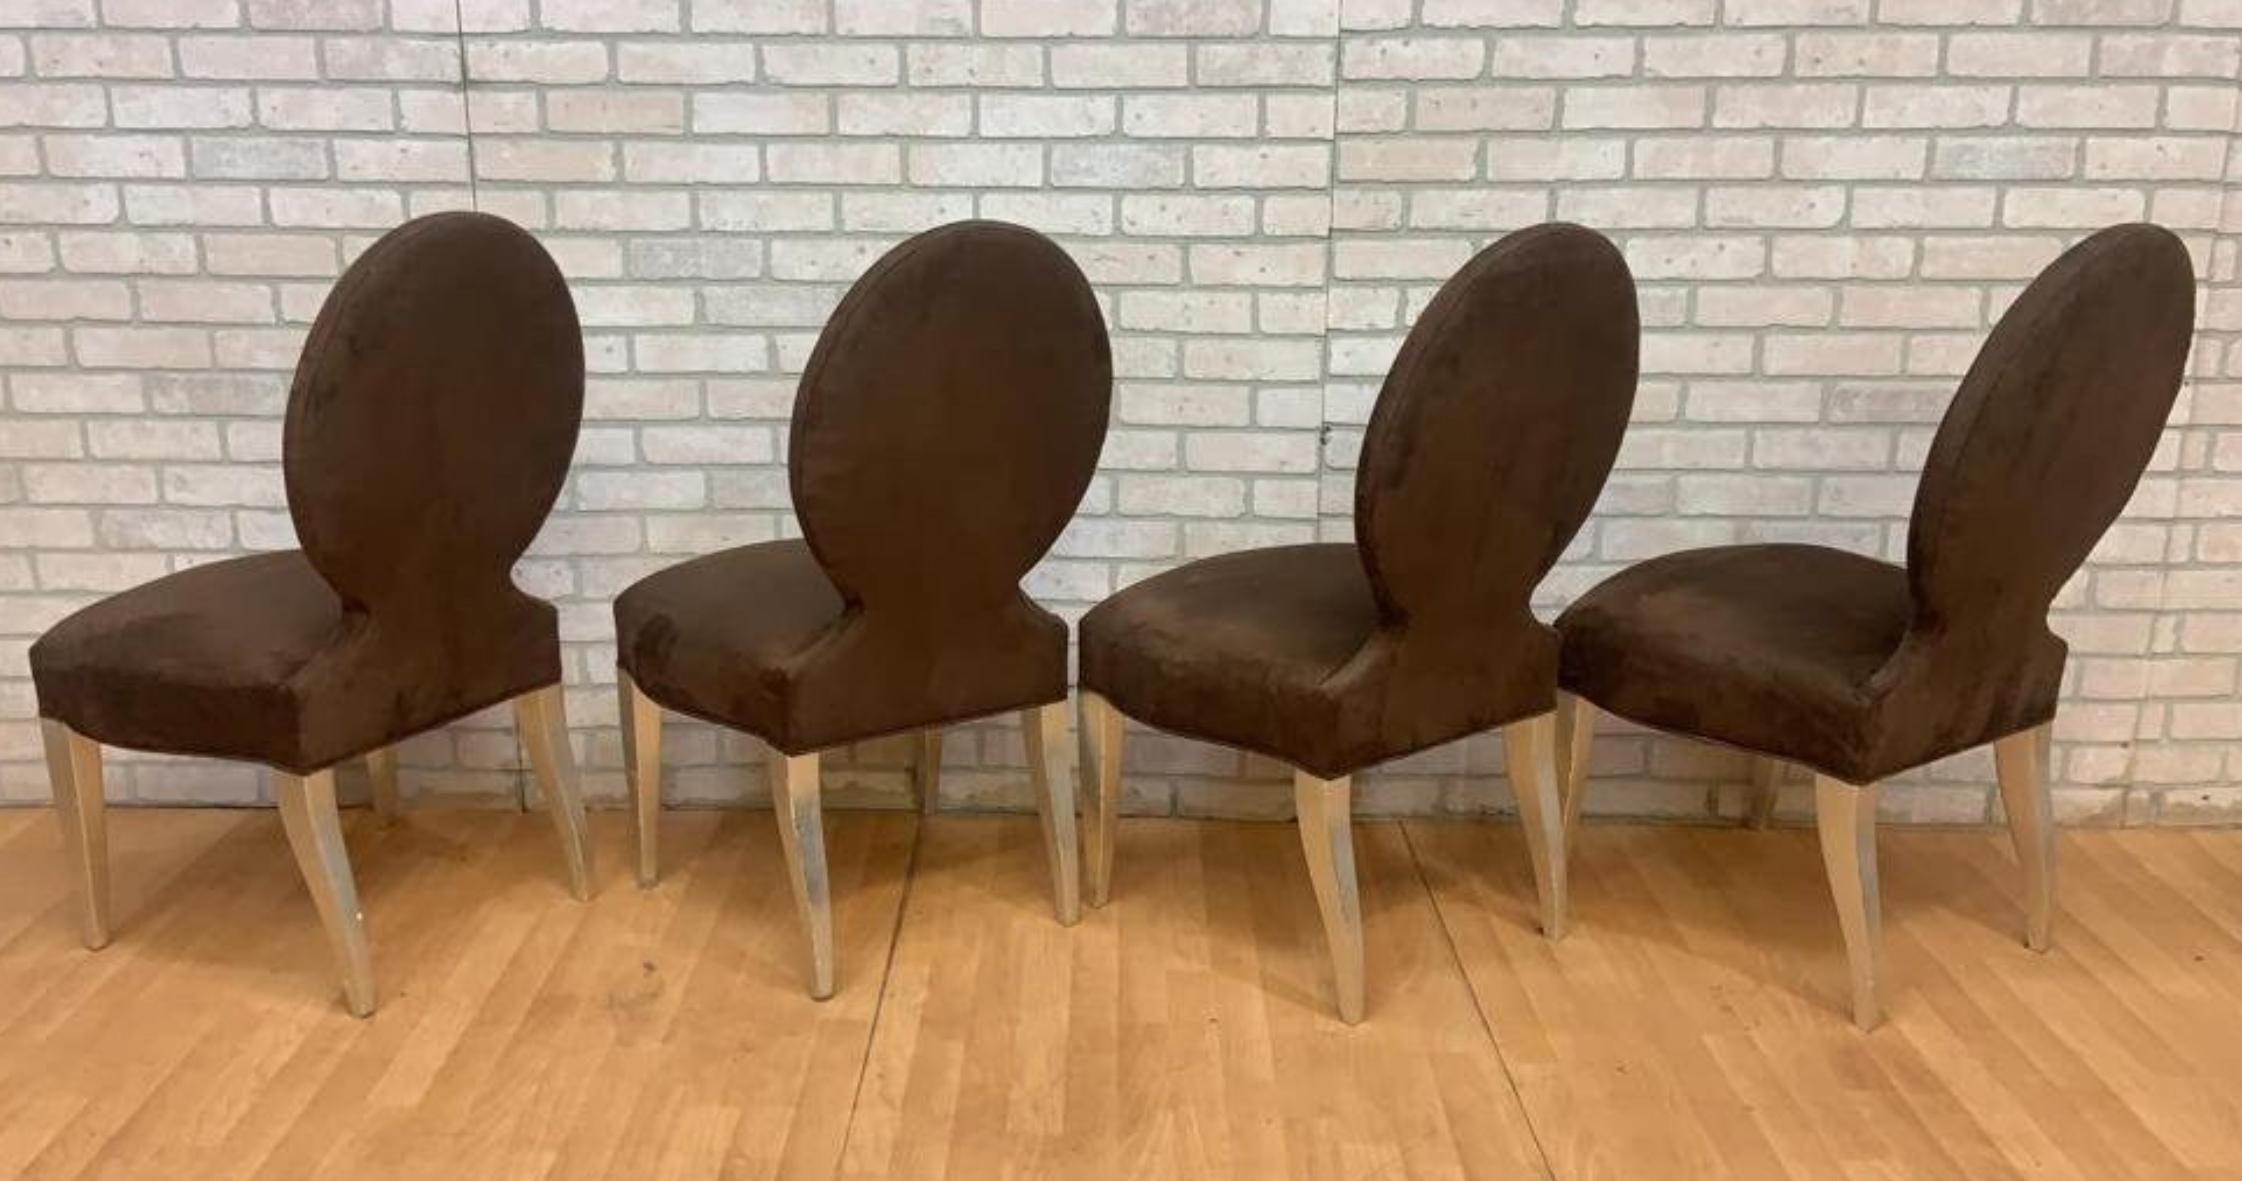 Hand-Crafted Vintage Donghia Casper Dining Side Chairs in Brown Suede - Set of 4